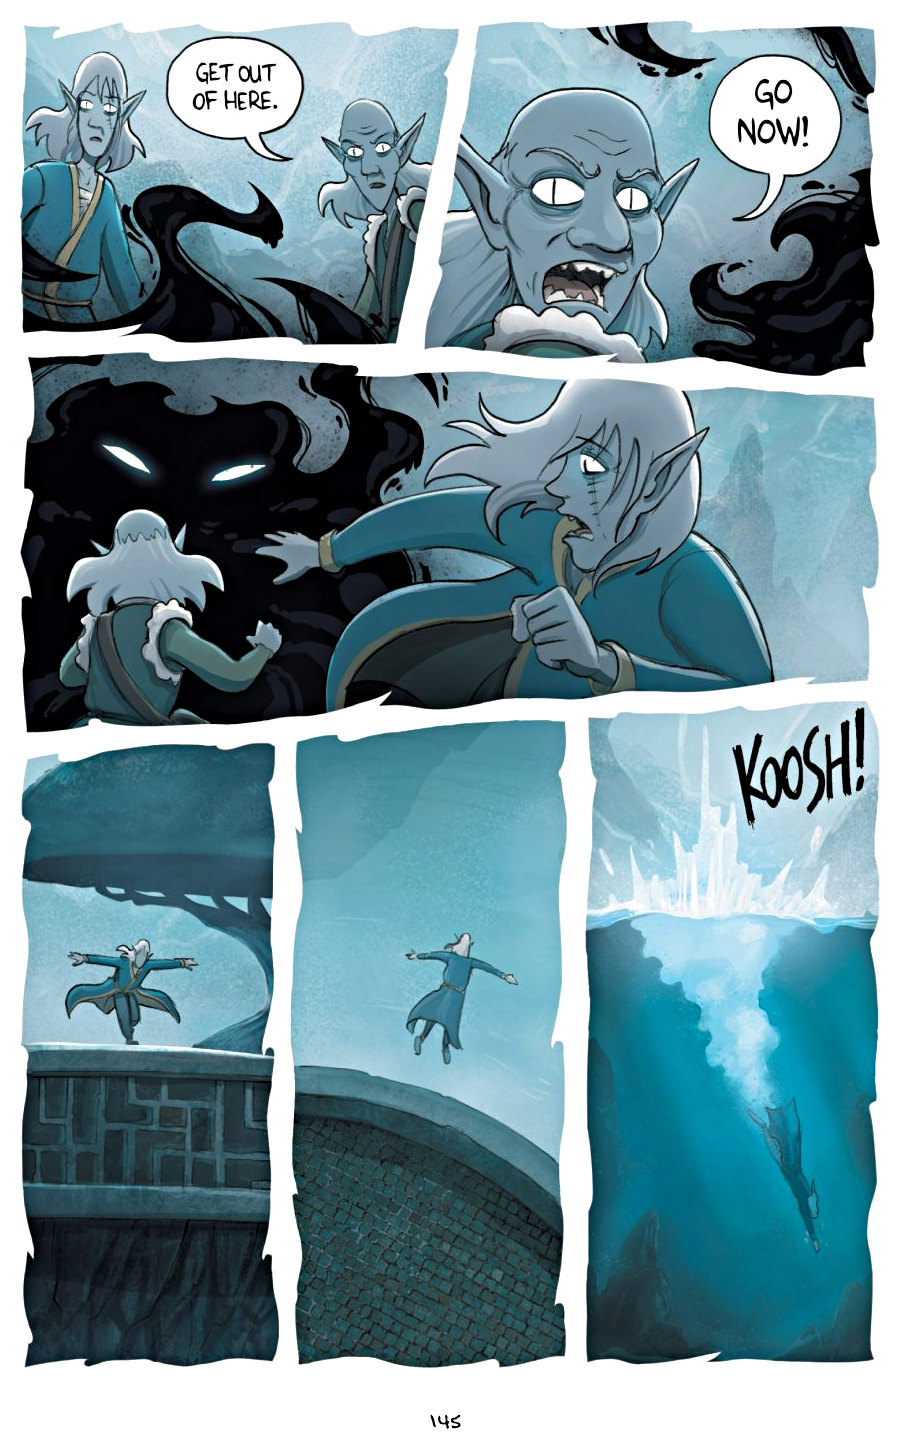 page 145 of amulet 5 prince of the elves graphic novel